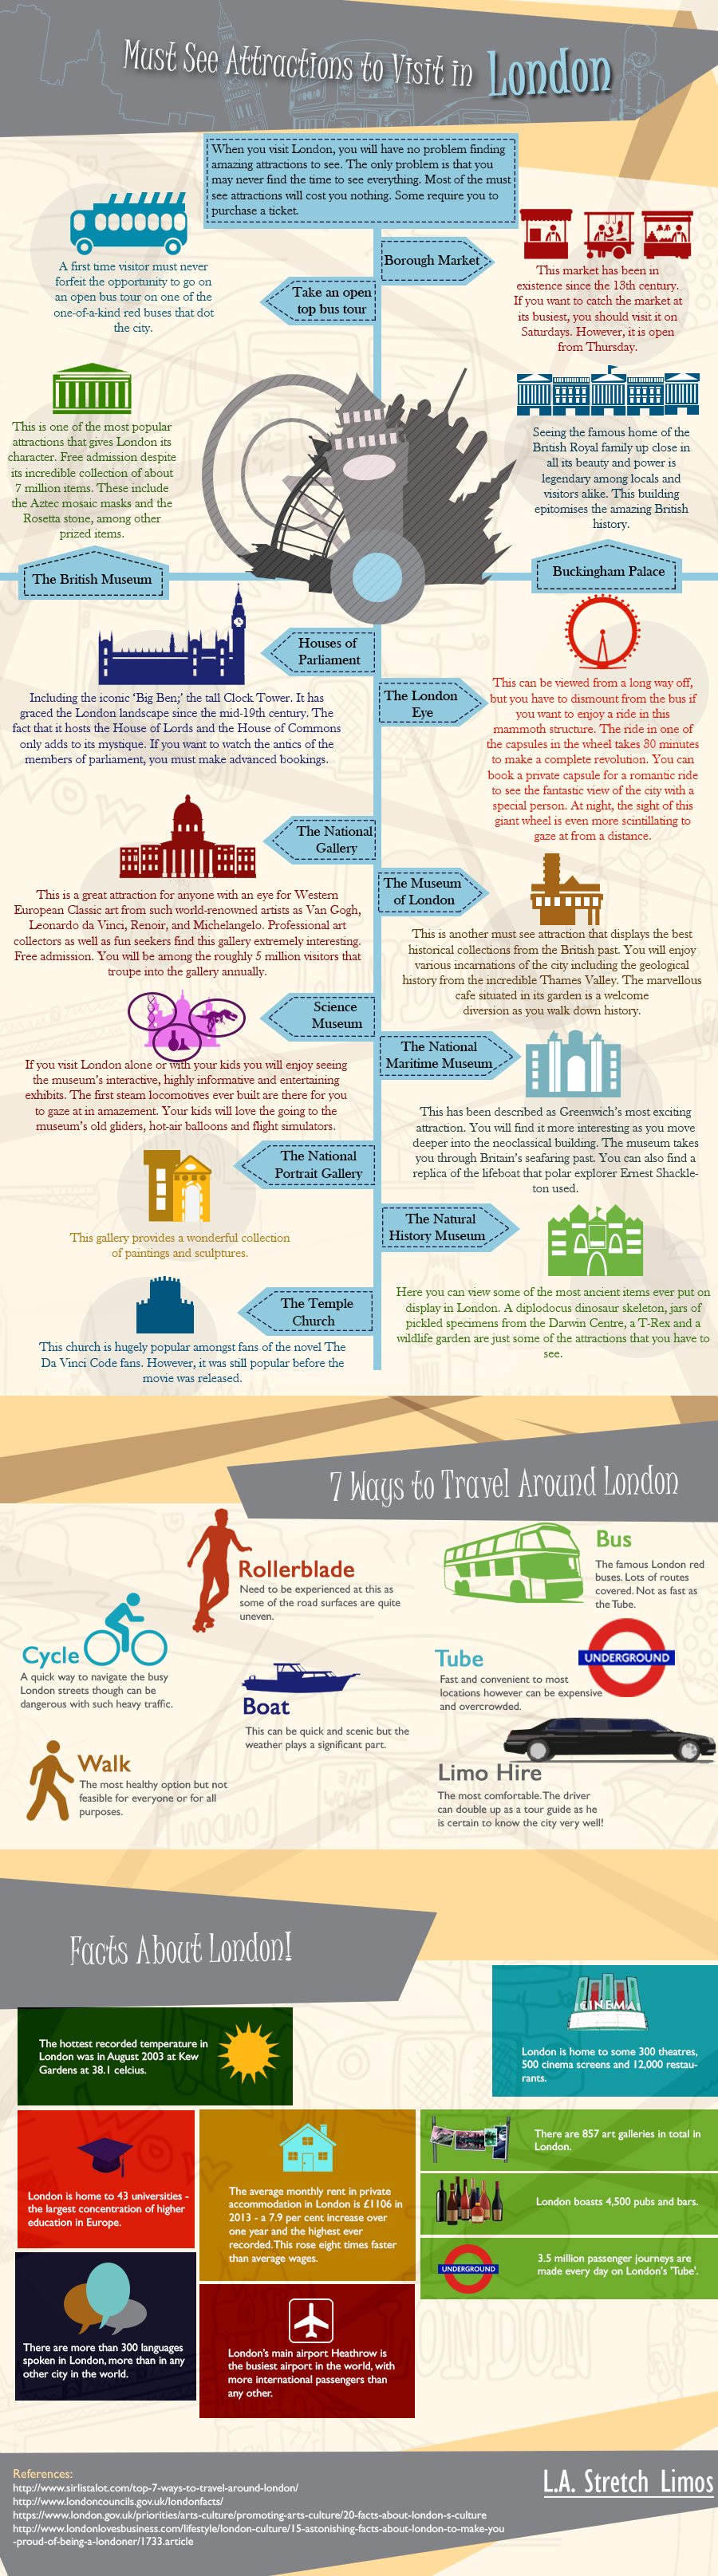 Must See Attractions To Visit London - Infographic